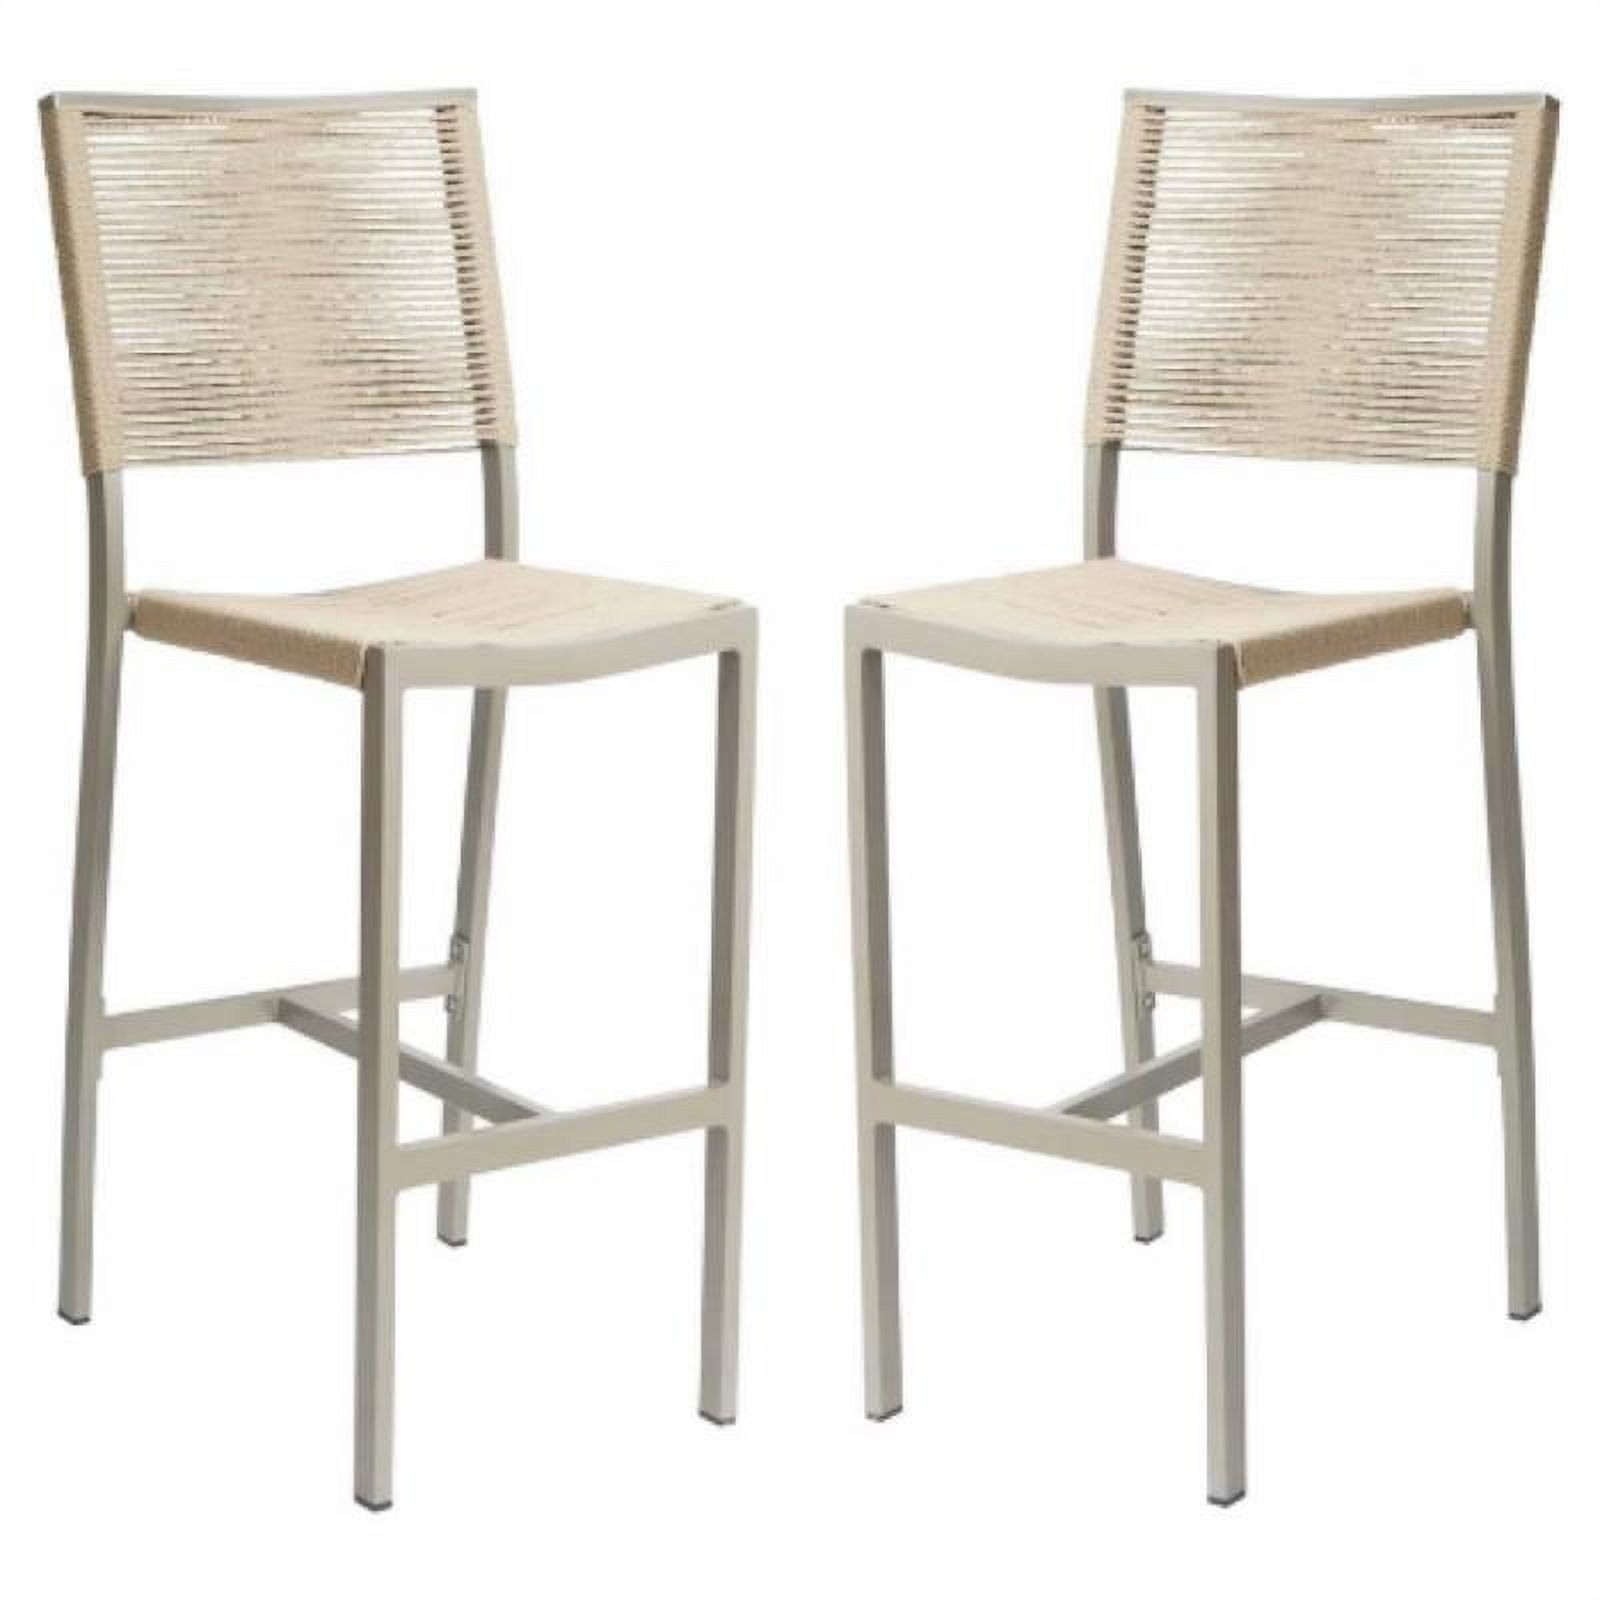 Home Square Aluminum Frame Patio Bar Side Stool in Tan Rope - Set of 2 - image 1 of 2